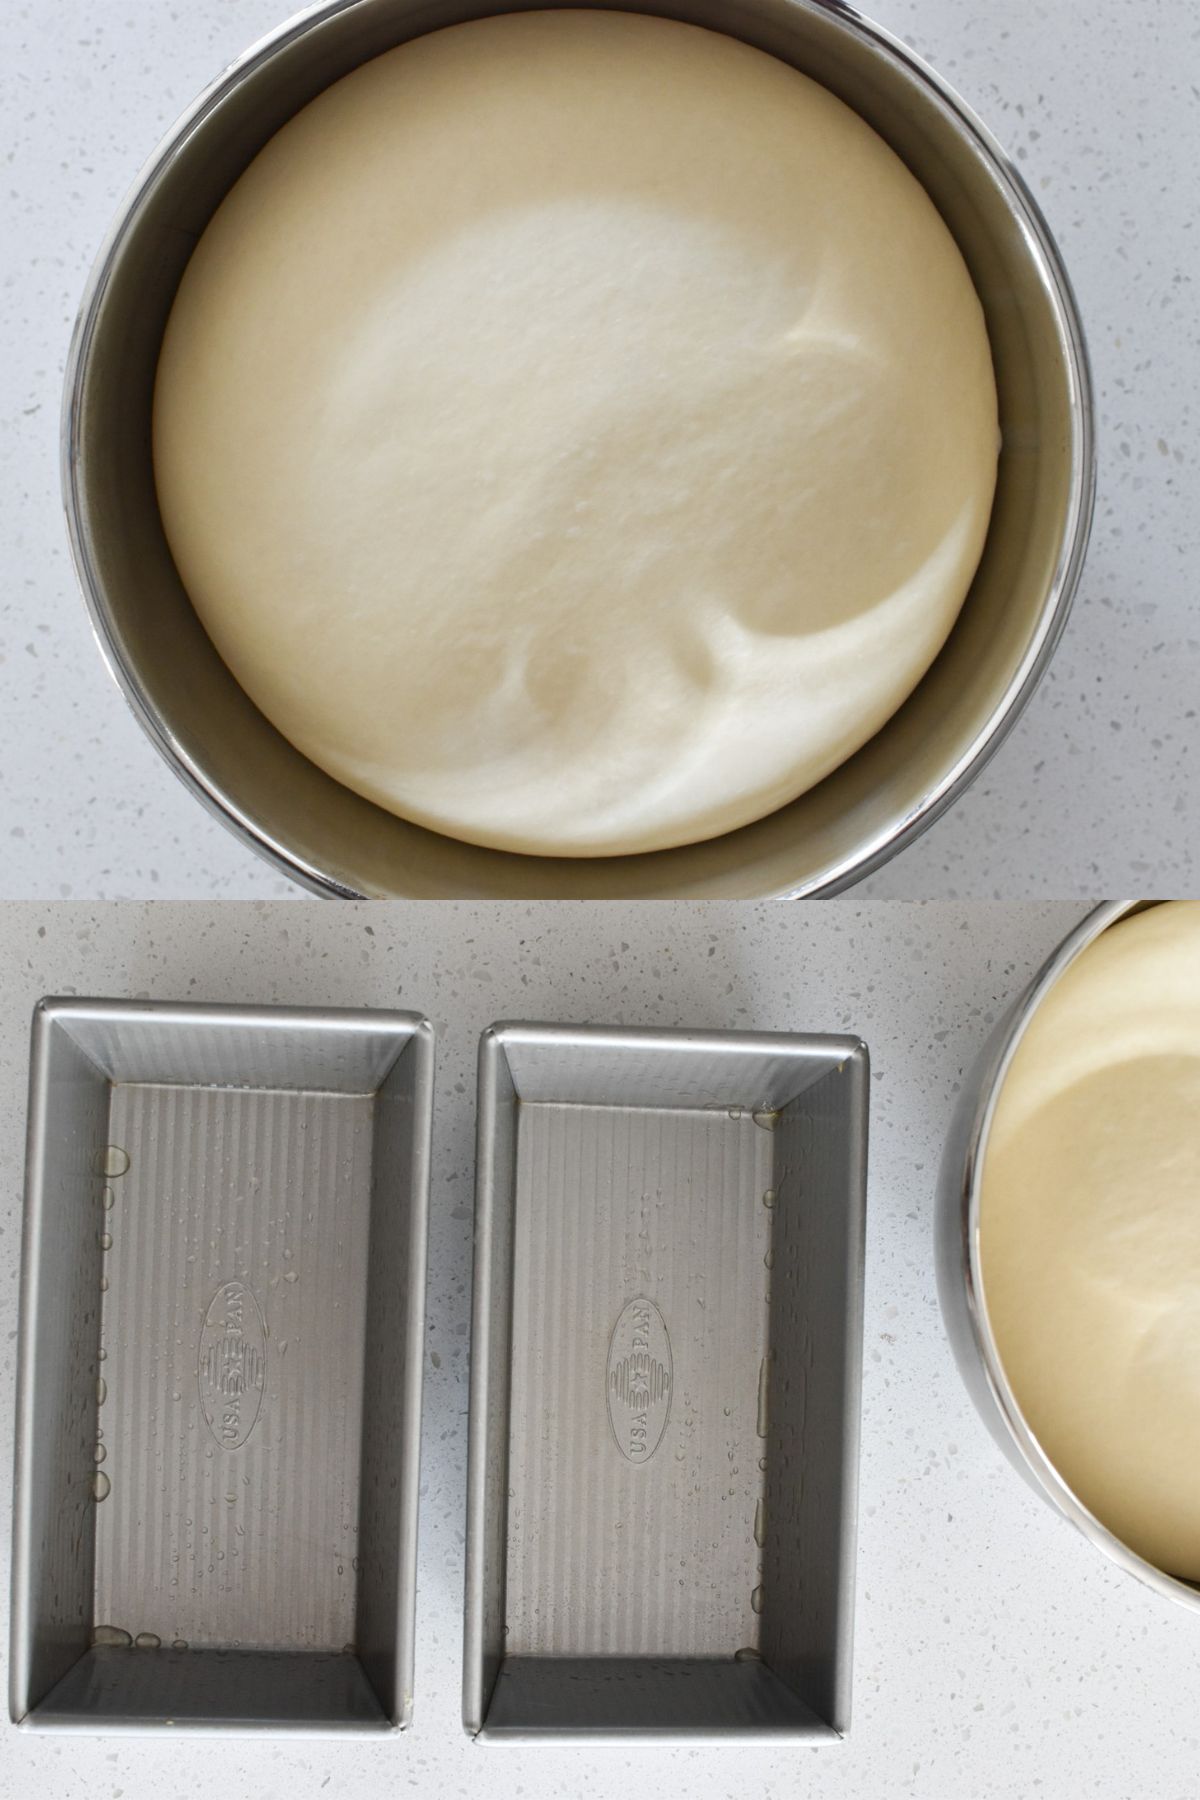 First image is of risen dough in a bowl and the second image is two greased loaf pan with dough next to them.